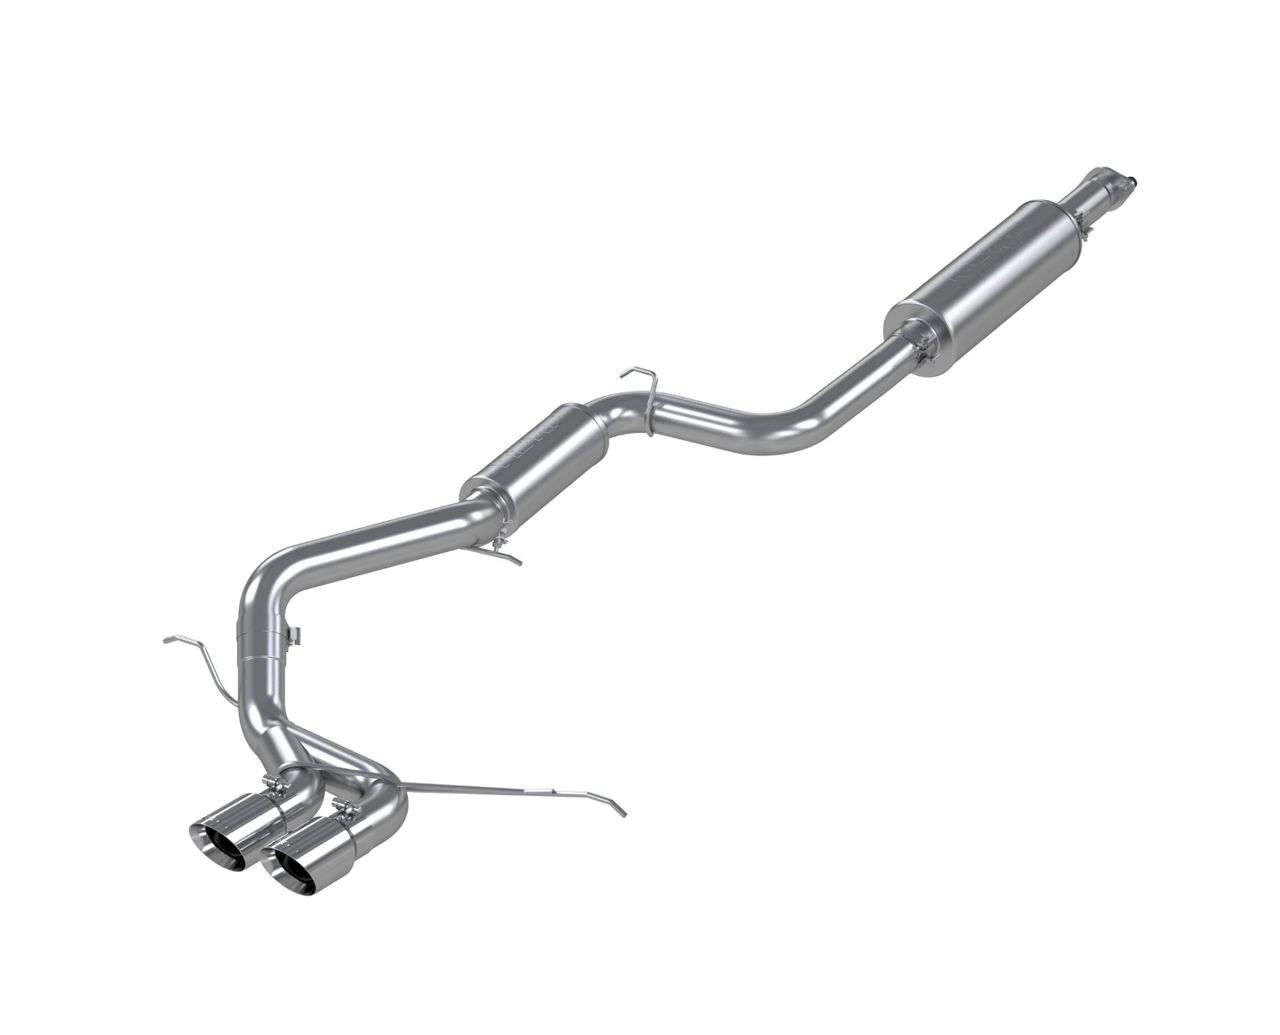 MBRP S4200AL Dual Aluminized Steel Exhaust for 13-18 Ford Focus ST 2.0L Ecoboost